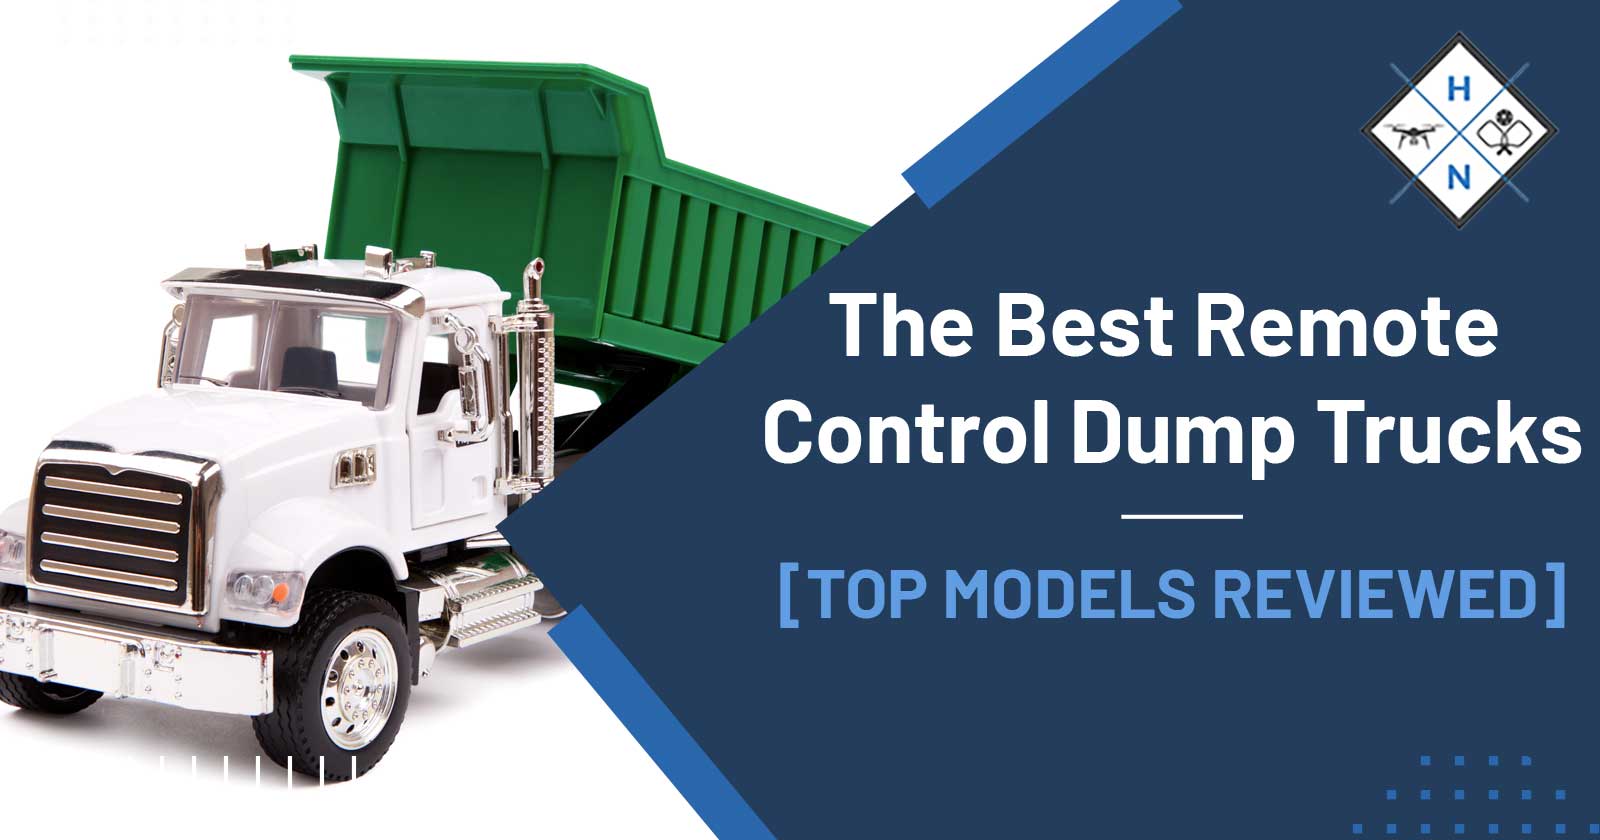 The Best Remote-Control Dump Trucks [TOP MODELS REVIEWED]